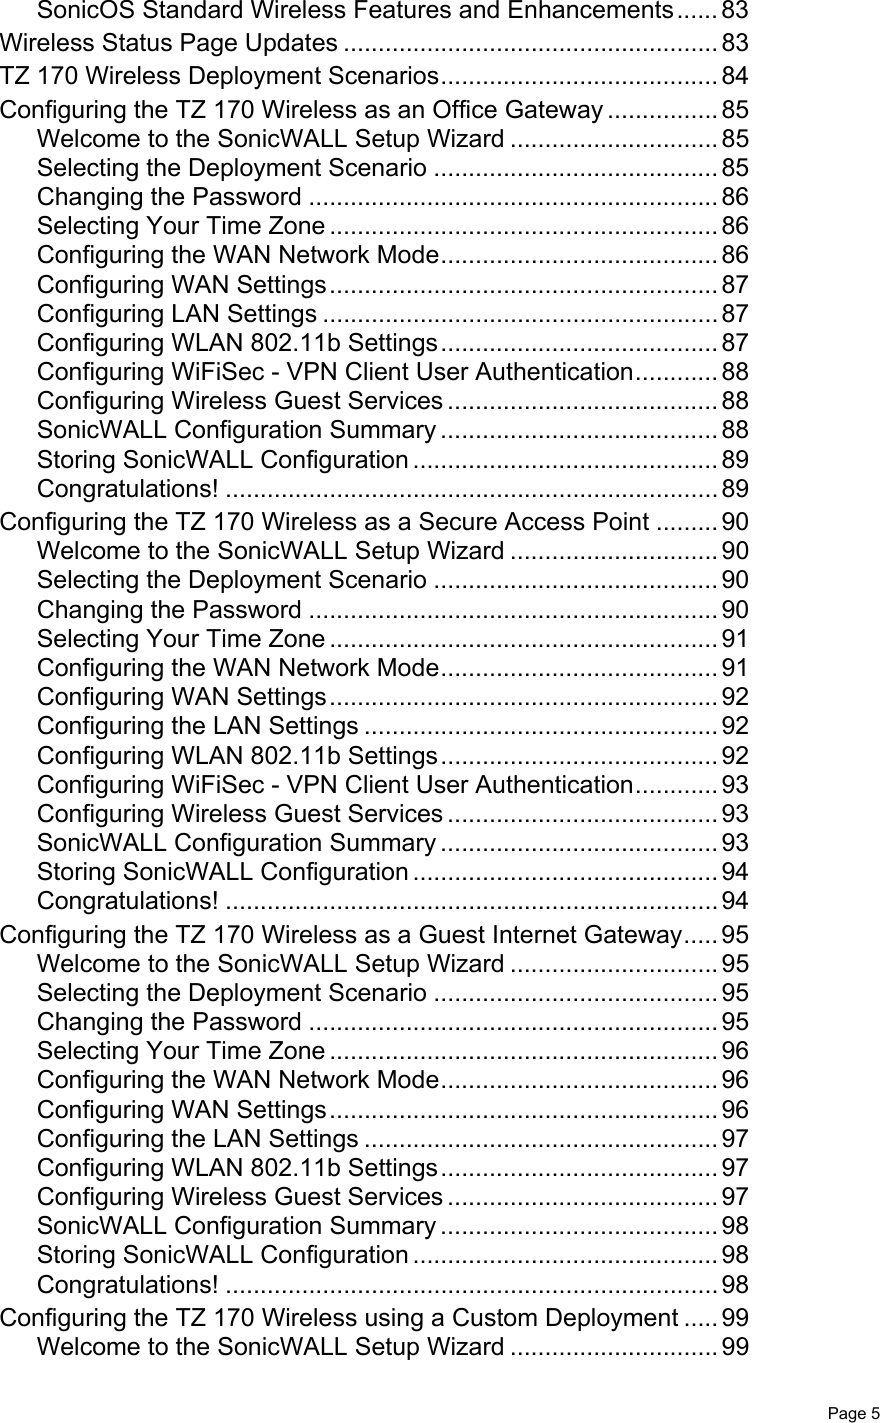   Page 5SonicOS Standard Wireless Features and Enhancements...... 83Wireless Status Page Updates ...................................................... 83TZ 170 Wireless Deployment Scenarios........................................ 84Configuring the TZ 170 Wireless as an Office Gateway ................ 85Welcome to the SonicWALL Setup Wizard .............................. 85Selecting the Deployment Scenario ......................................... 85Changing the Password ........................................................... 86Selecting Your Time Zone ........................................................ 86Configuring the WAN Network Mode........................................ 86Configuring WAN Settings........................................................ 87Configuring LAN Settings ......................................................... 87Configuring WLAN 802.11b Settings........................................ 87Configuring WiFiSec - VPN Client User Authentication............ 88Configuring Wireless Guest Services ....................................... 88SonicWALL Configuration Summary ........................................ 88Storing SonicWALL Configuration ............................................ 89Congratulations! ....................................................................... 89Configuring the TZ 170 Wireless as a Secure Access Point ......... 90Welcome to the SonicWALL Setup Wizard .............................. 90Selecting the Deployment Scenario ......................................... 90Changing the Password ........................................................... 90Selecting Your Time Zone ........................................................ 91Configuring the WAN Network Mode........................................ 91Configuring WAN Settings........................................................ 92Configuring the LAN Settings ................................................... 92Configuring WLAN 802.11b Settings........................................ 92Configuring WiFiSec - VPN Client User Authentication............ 93Configuring Wireless Guest Services ....................................... 93SonicWALL Configuration Summary ........................................ 93Storing SonicWALL Configuration ............................................ 94Congratulations! ....................................................................... 94Configuring the TZ 170 Wireless as a Guest Internet Gateway..... 95Welcome to the SonicWALL Setup Wizard .............................. 95Selecting the Deployment Scenario ......................................... 95Changing the Password ........................................................... 95Selecting Your Time Zone ........................................................ 96Configuring the WAN Network Mode........................................ 96Configuring WAN Settings........................................................ 96Configuring the LAN Settings ................................................... 97Configuring WLAN 802.11b Settings........................................ 97Configuring Wireless Guest Services ....................................... 97SonicWALL Configuration Summary ........................................ 98Storing SonicWALL Configuration ............................................ 98Congratulations! ....................................................................... 98Configuring the TZ 170 Wireless using a Custom Deployment ..... 99Welcome to the SonicWALL Setup Wizard .............................. 99